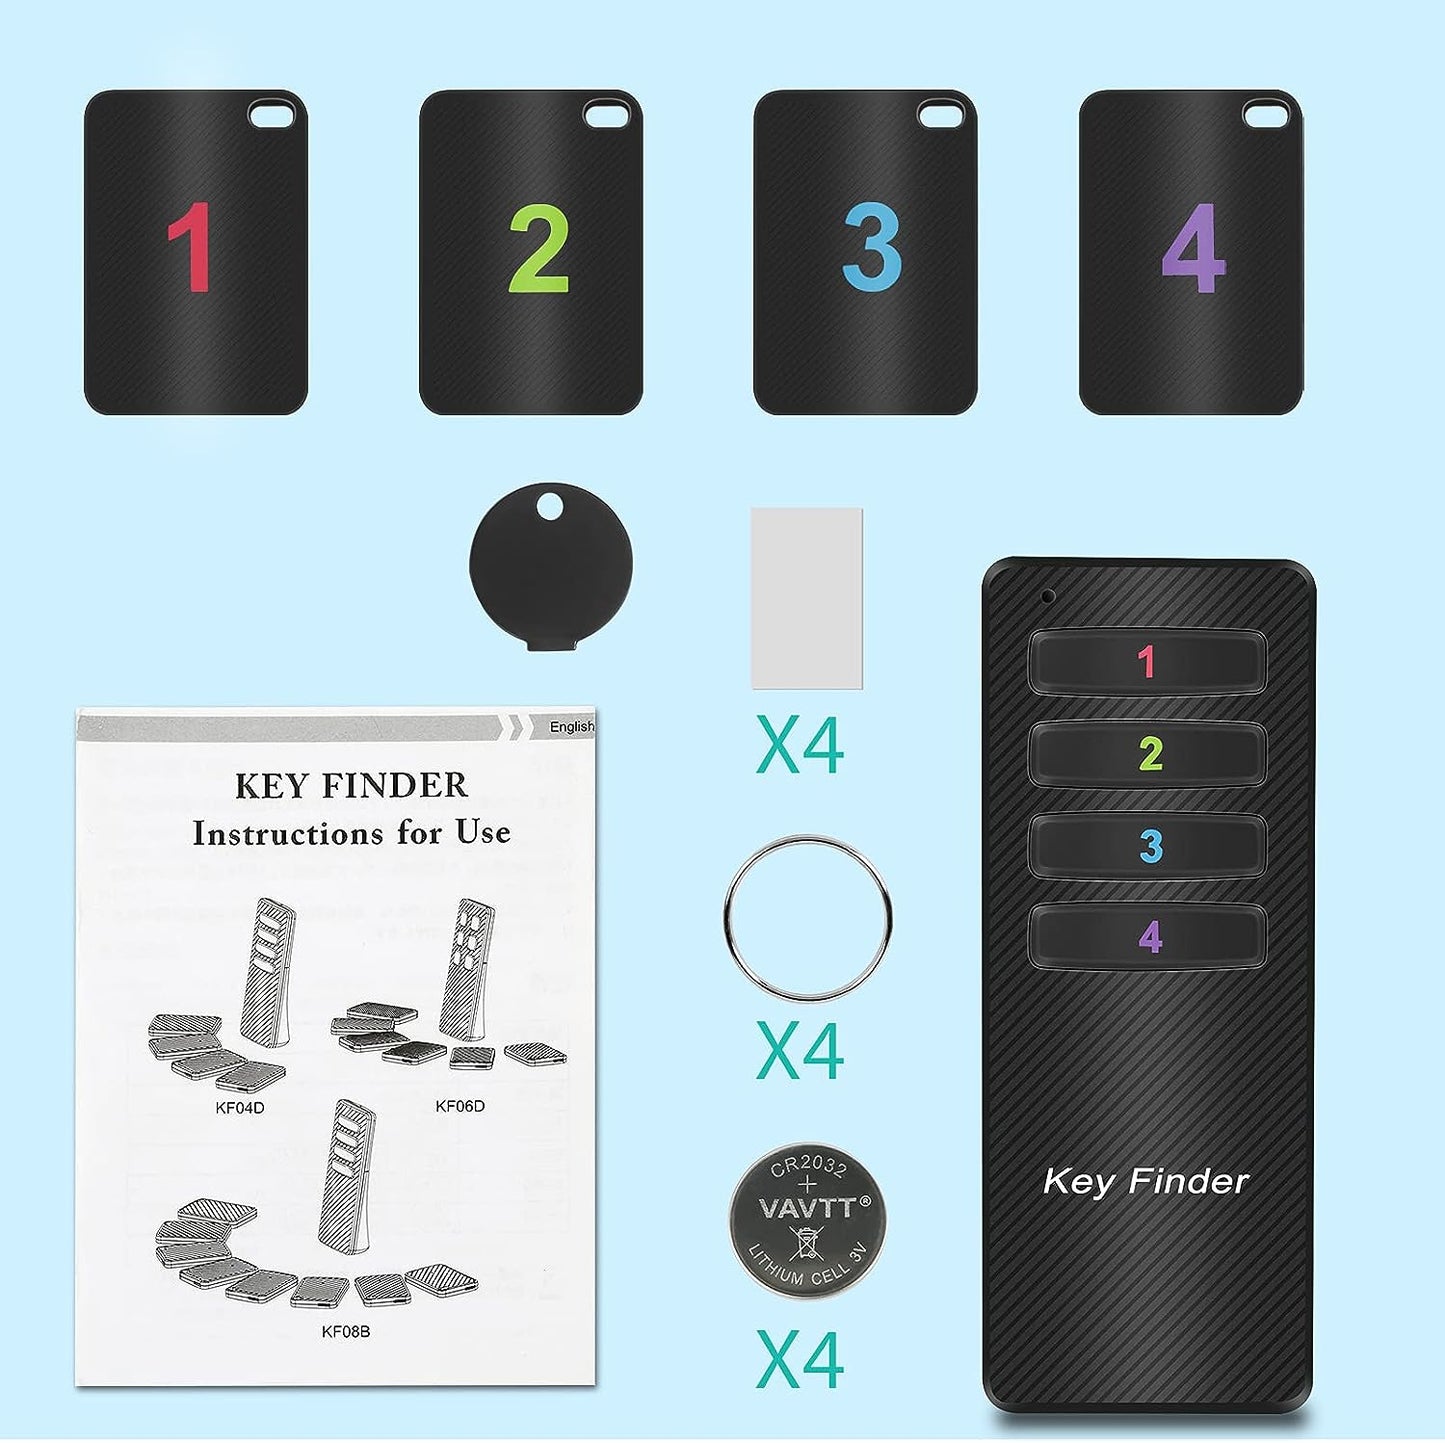 First-Rate Key Finder, Stick on TV Remote Control Finder | Find My Keys Device, 4 Pack Wireless Car Key Finders That Make Noise | 115ft Range 85dB RF Key Tracker, Phone/Wallet Finder with 4 Item Locator Tags